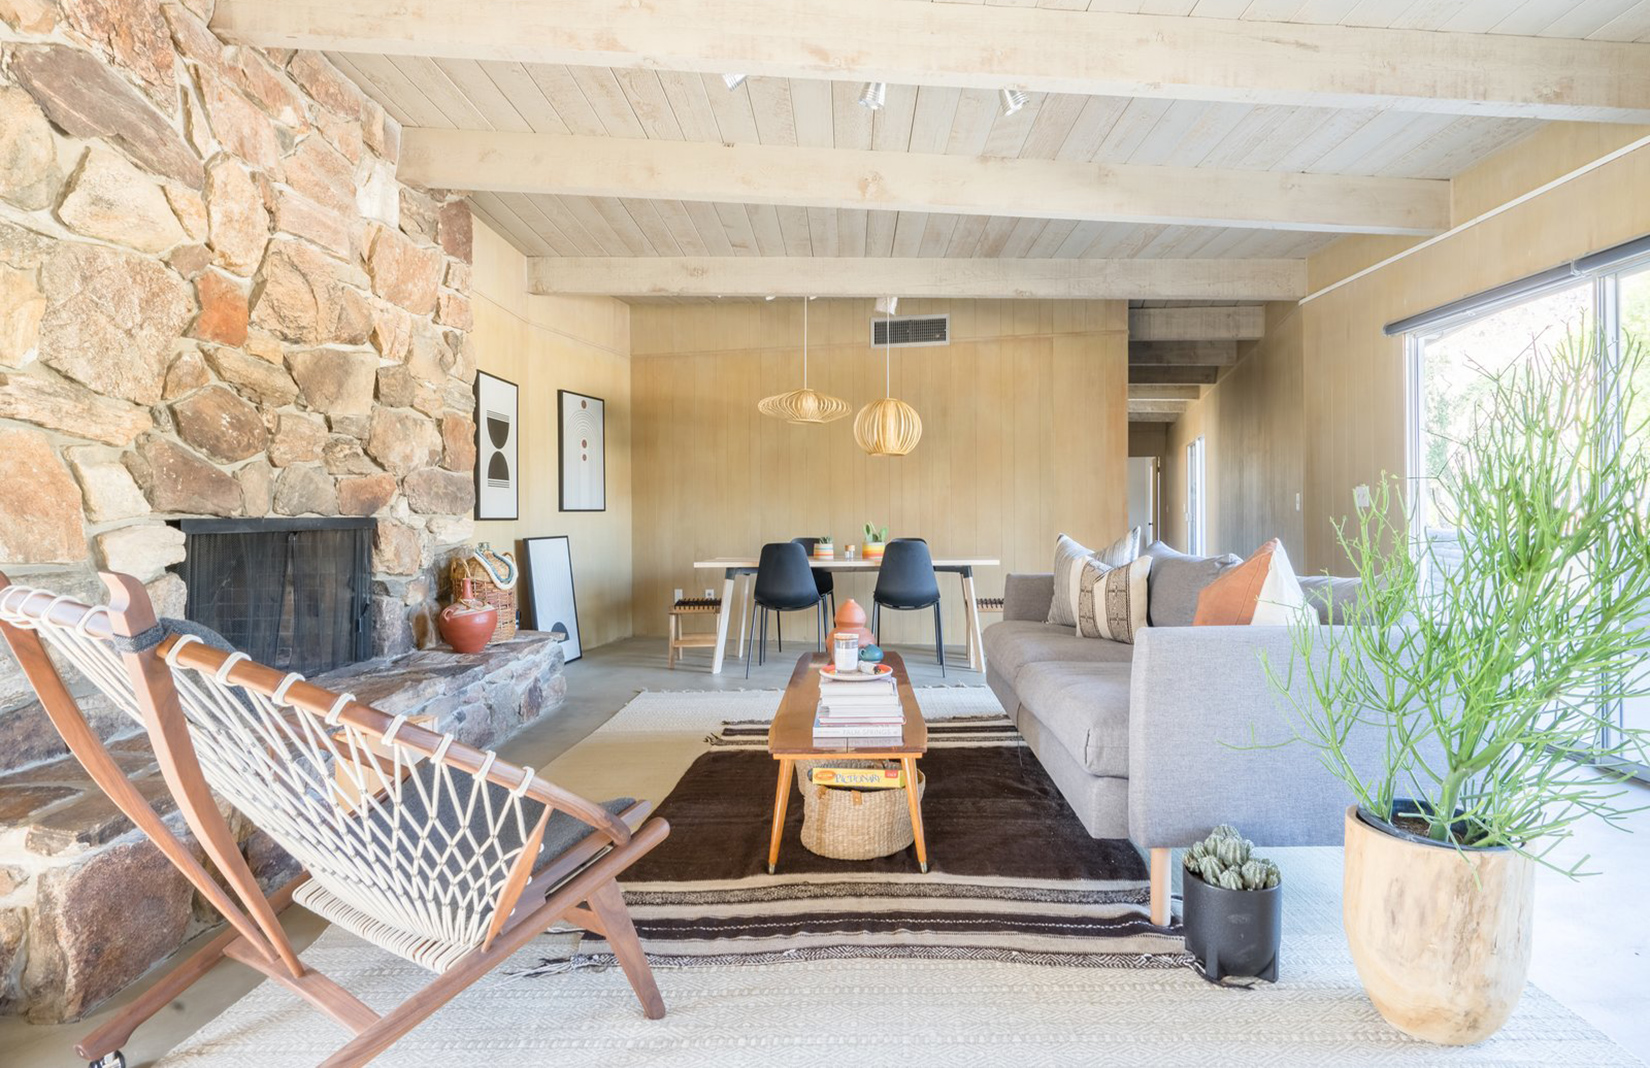 This desert modernist retreat hunkers down in California’s largest state park